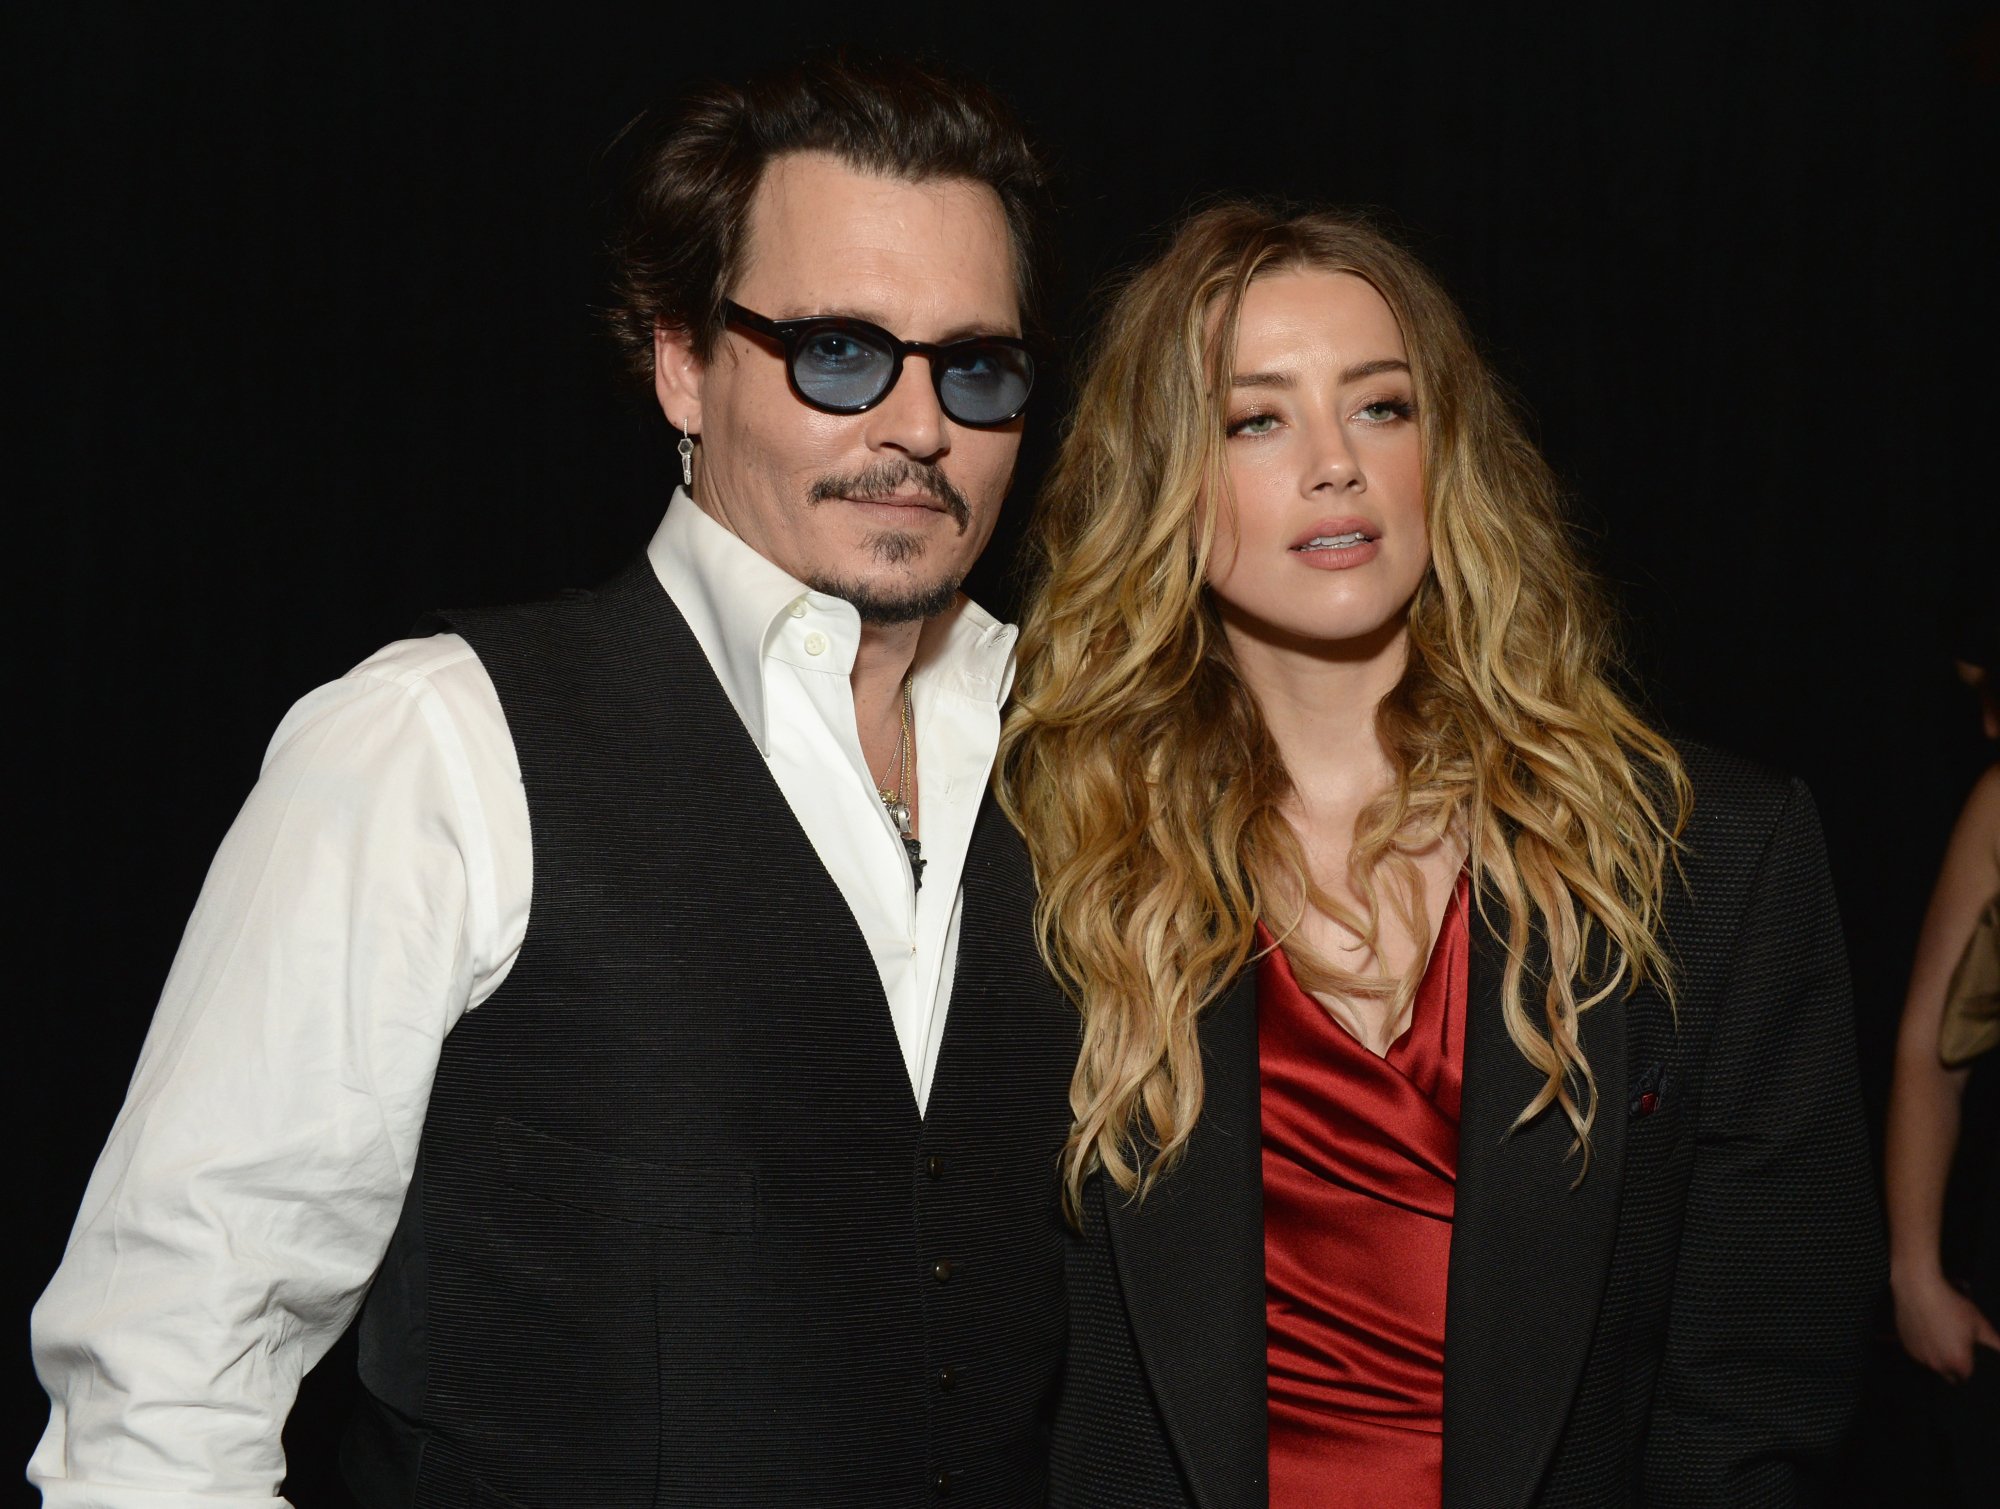 Johnny Depp and Amber Heard , who met on the production 'The Rum Diary' at The Art of Elysium 2016 HEAVEN Gala